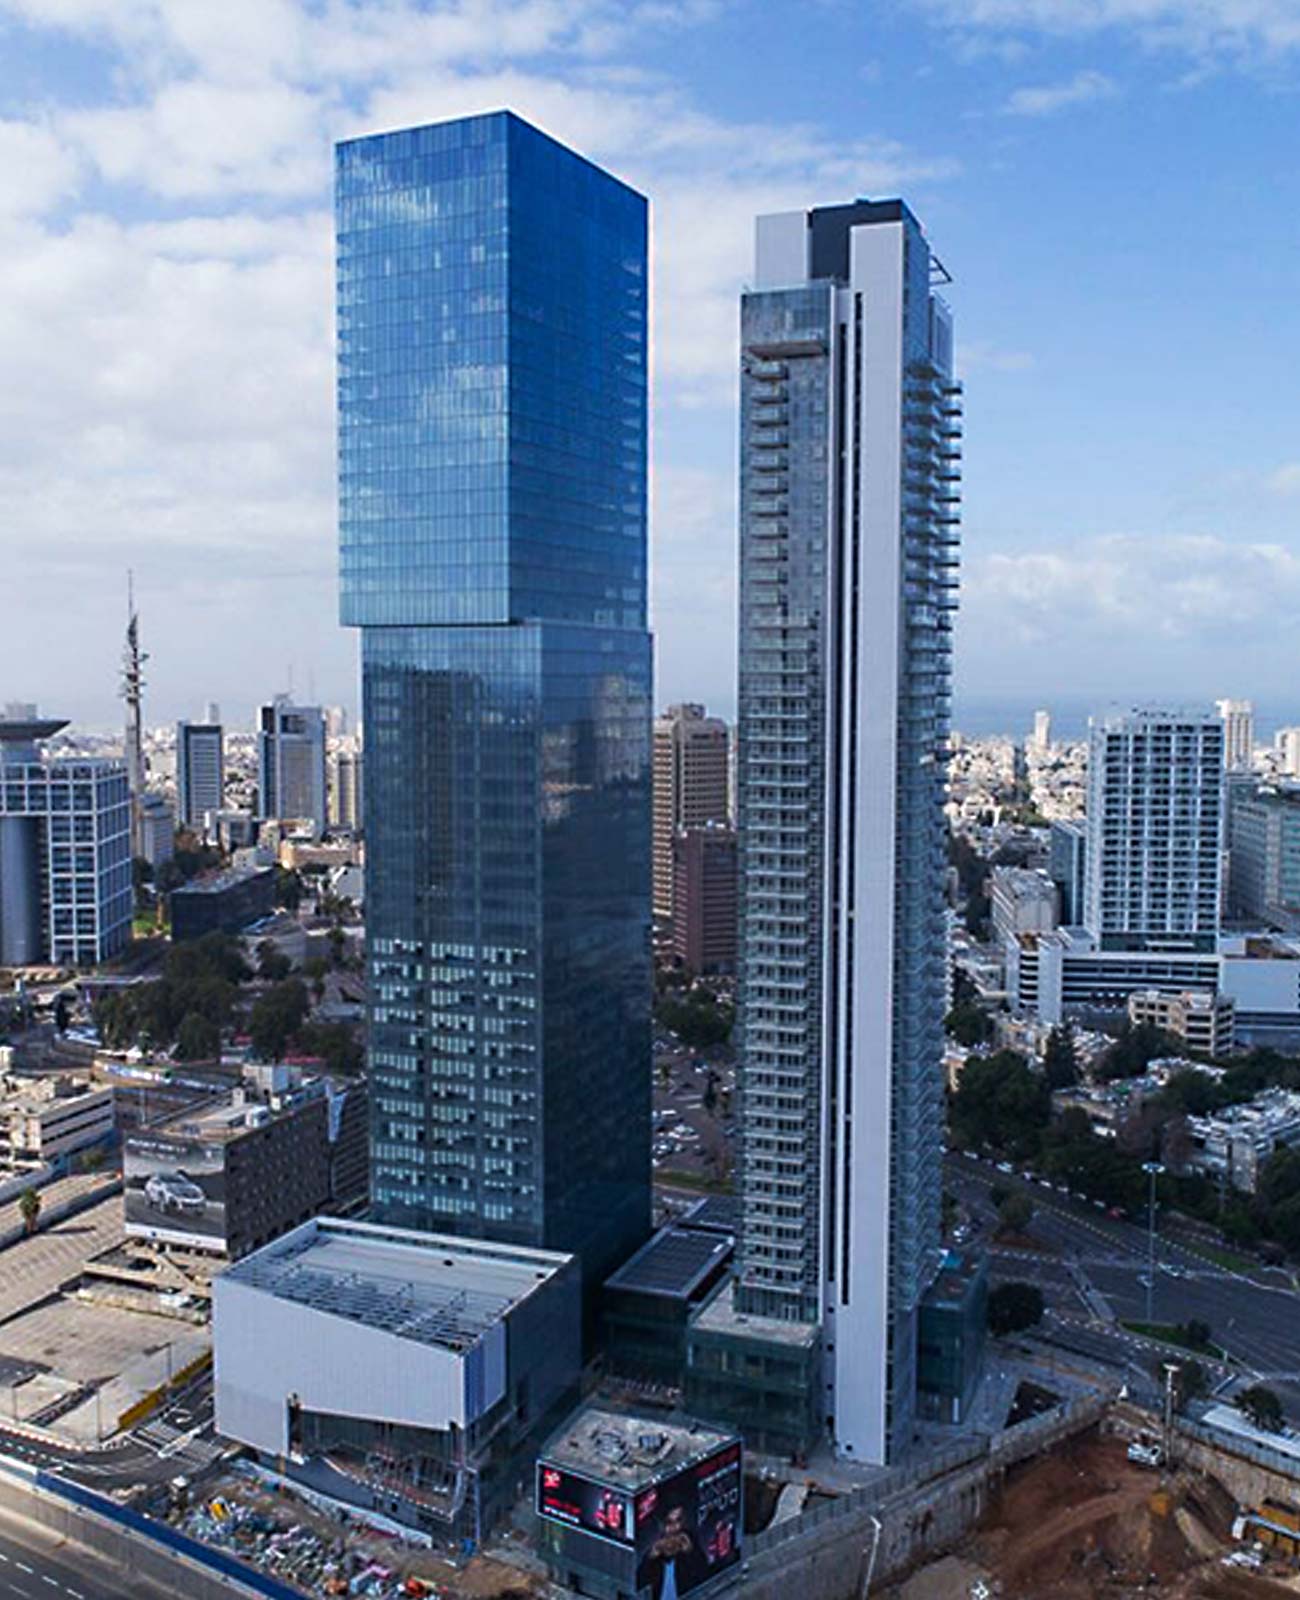 Tel Aviv cityscape with the Electra building in the background